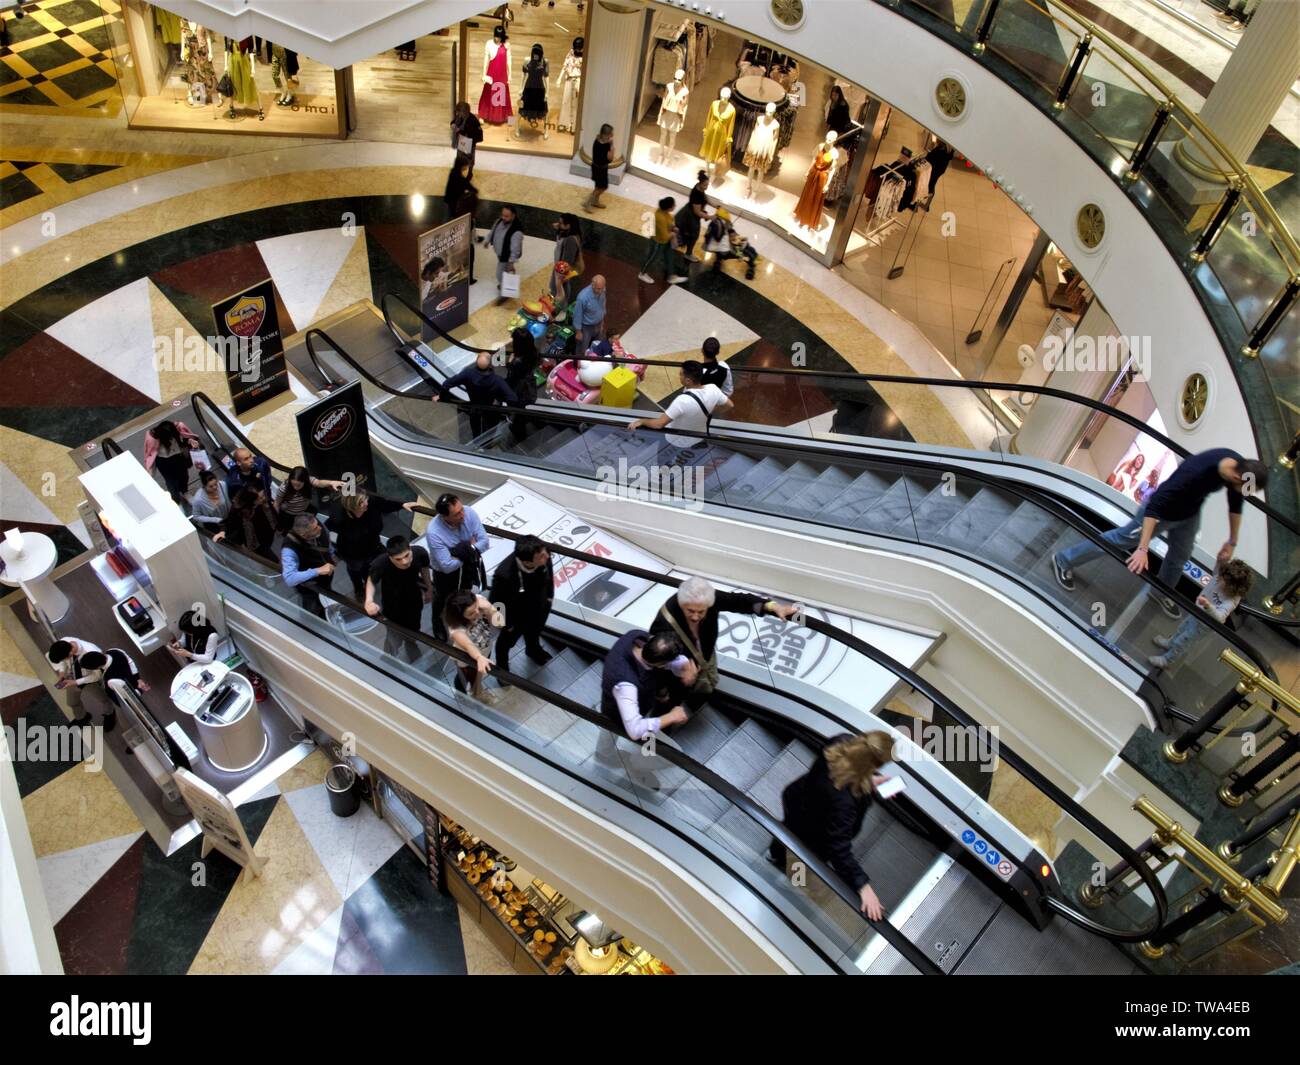 PEOPLE AND SHOPS IN EUROMA 2 SHOPPING CENTER IN ROME Stock Photo - Alamy